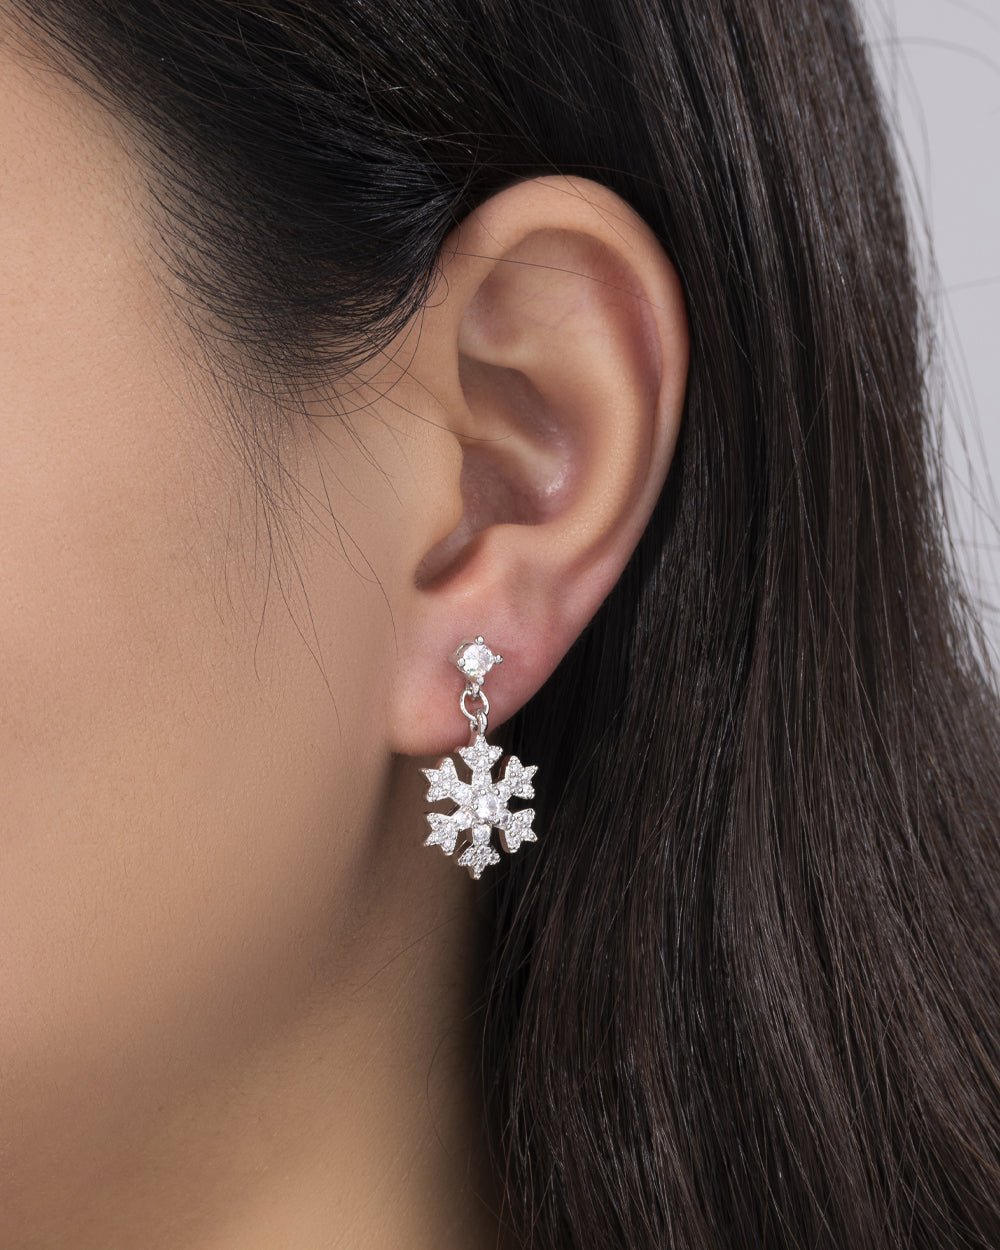 ICY SNOWFLAKE EARRINGS. - WHITE GOLD - Drippy Amsterdam